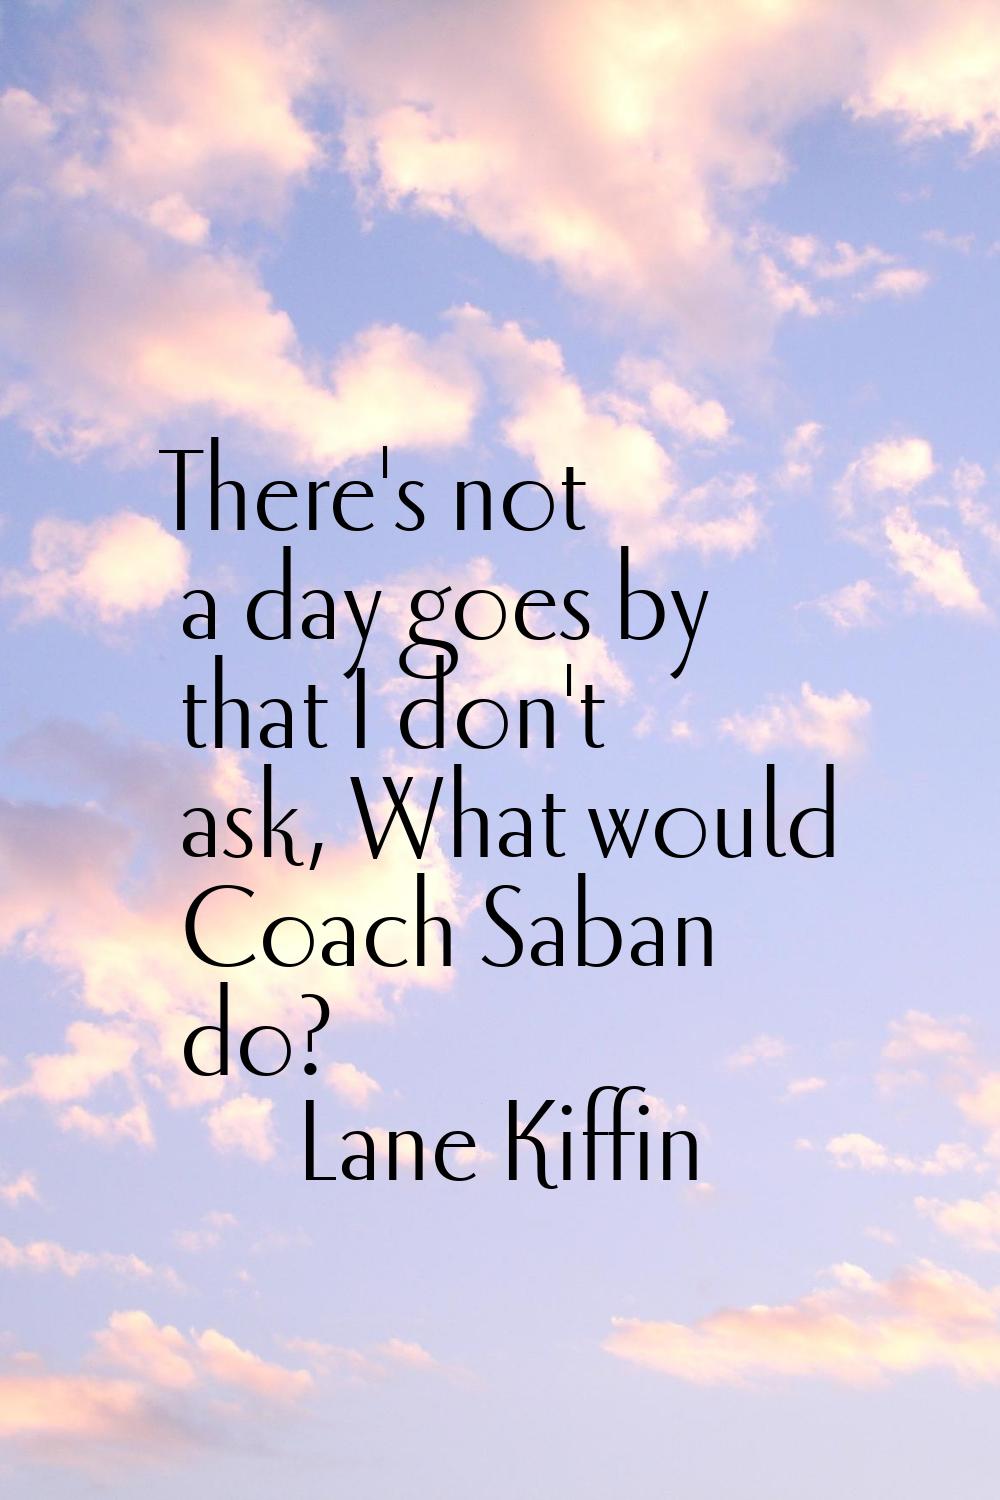 There's not a day goes by that I don't ask, What would Coach Saban do?